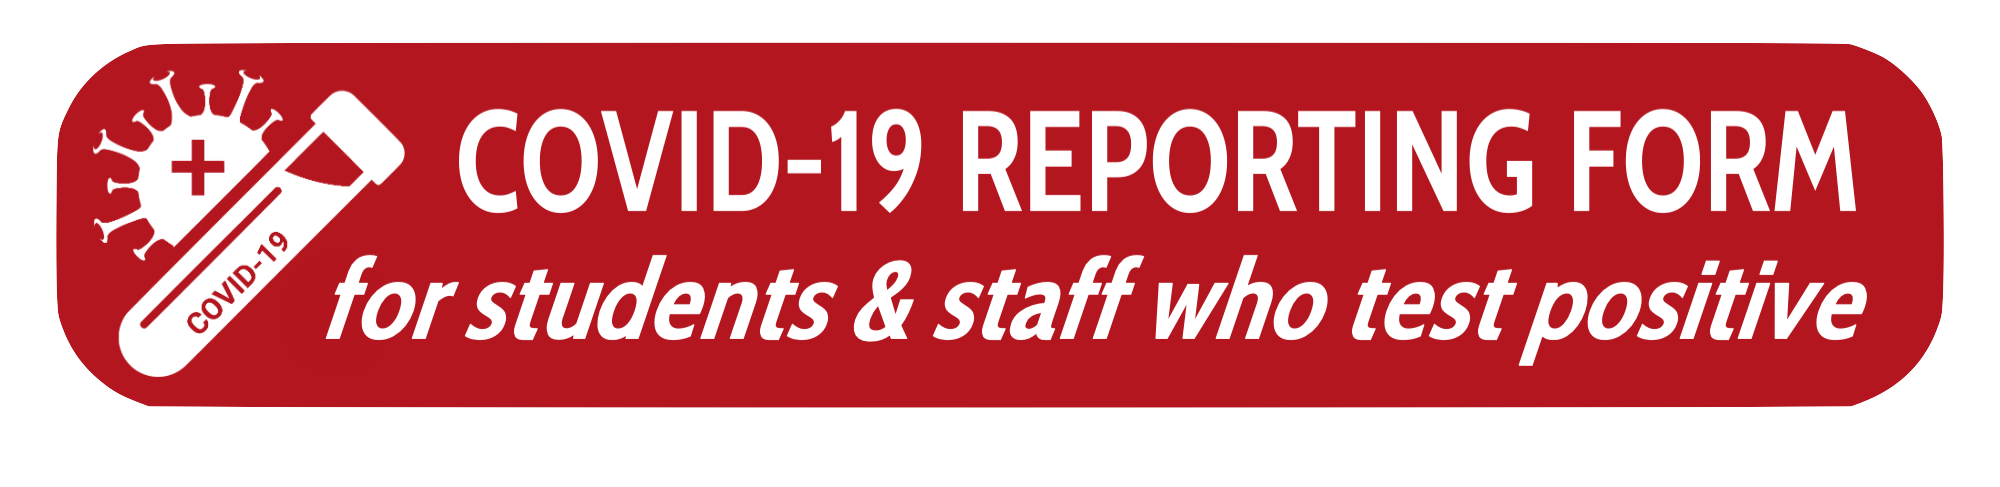 COVID-19 Reporting Form for students & staff who test positive